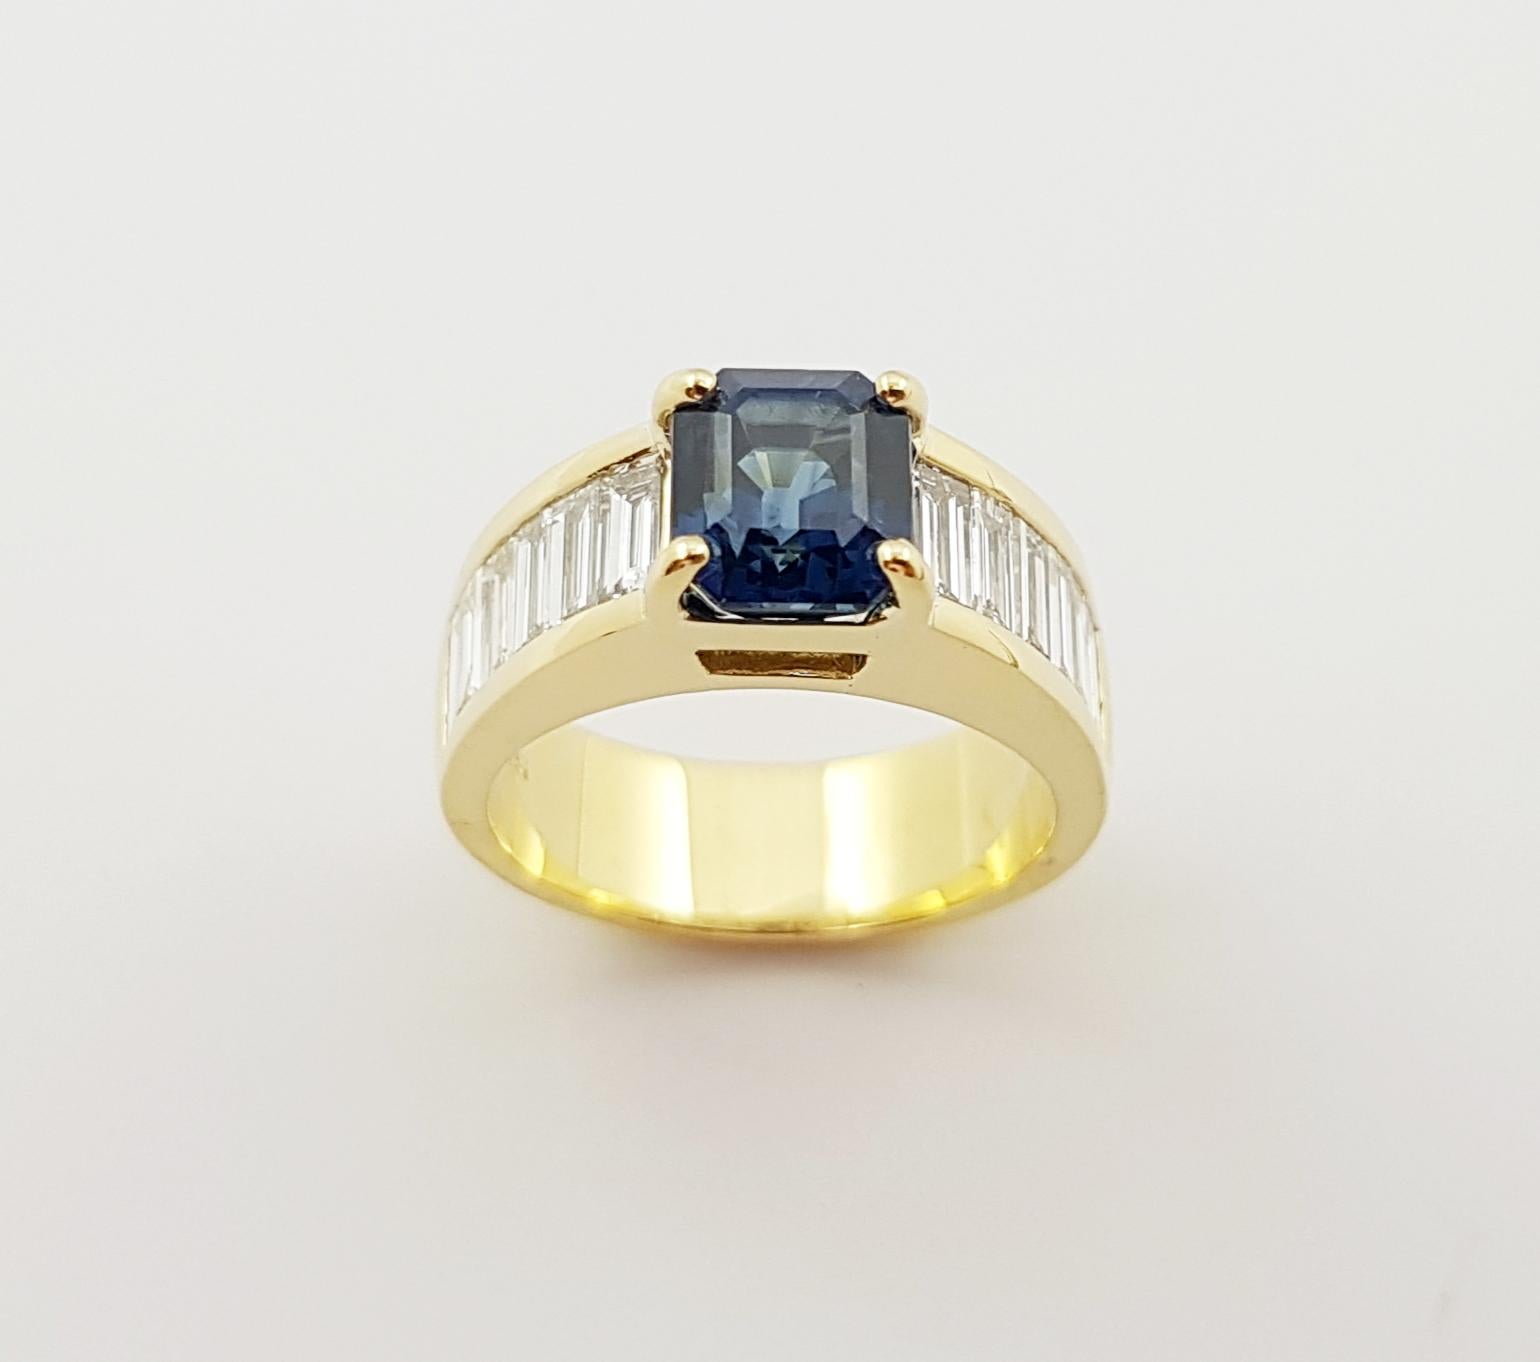 GIA Certified 3cts Blue Sapphire with Diamond Ring Set in 18 Karat Gold Settings For Sale 2